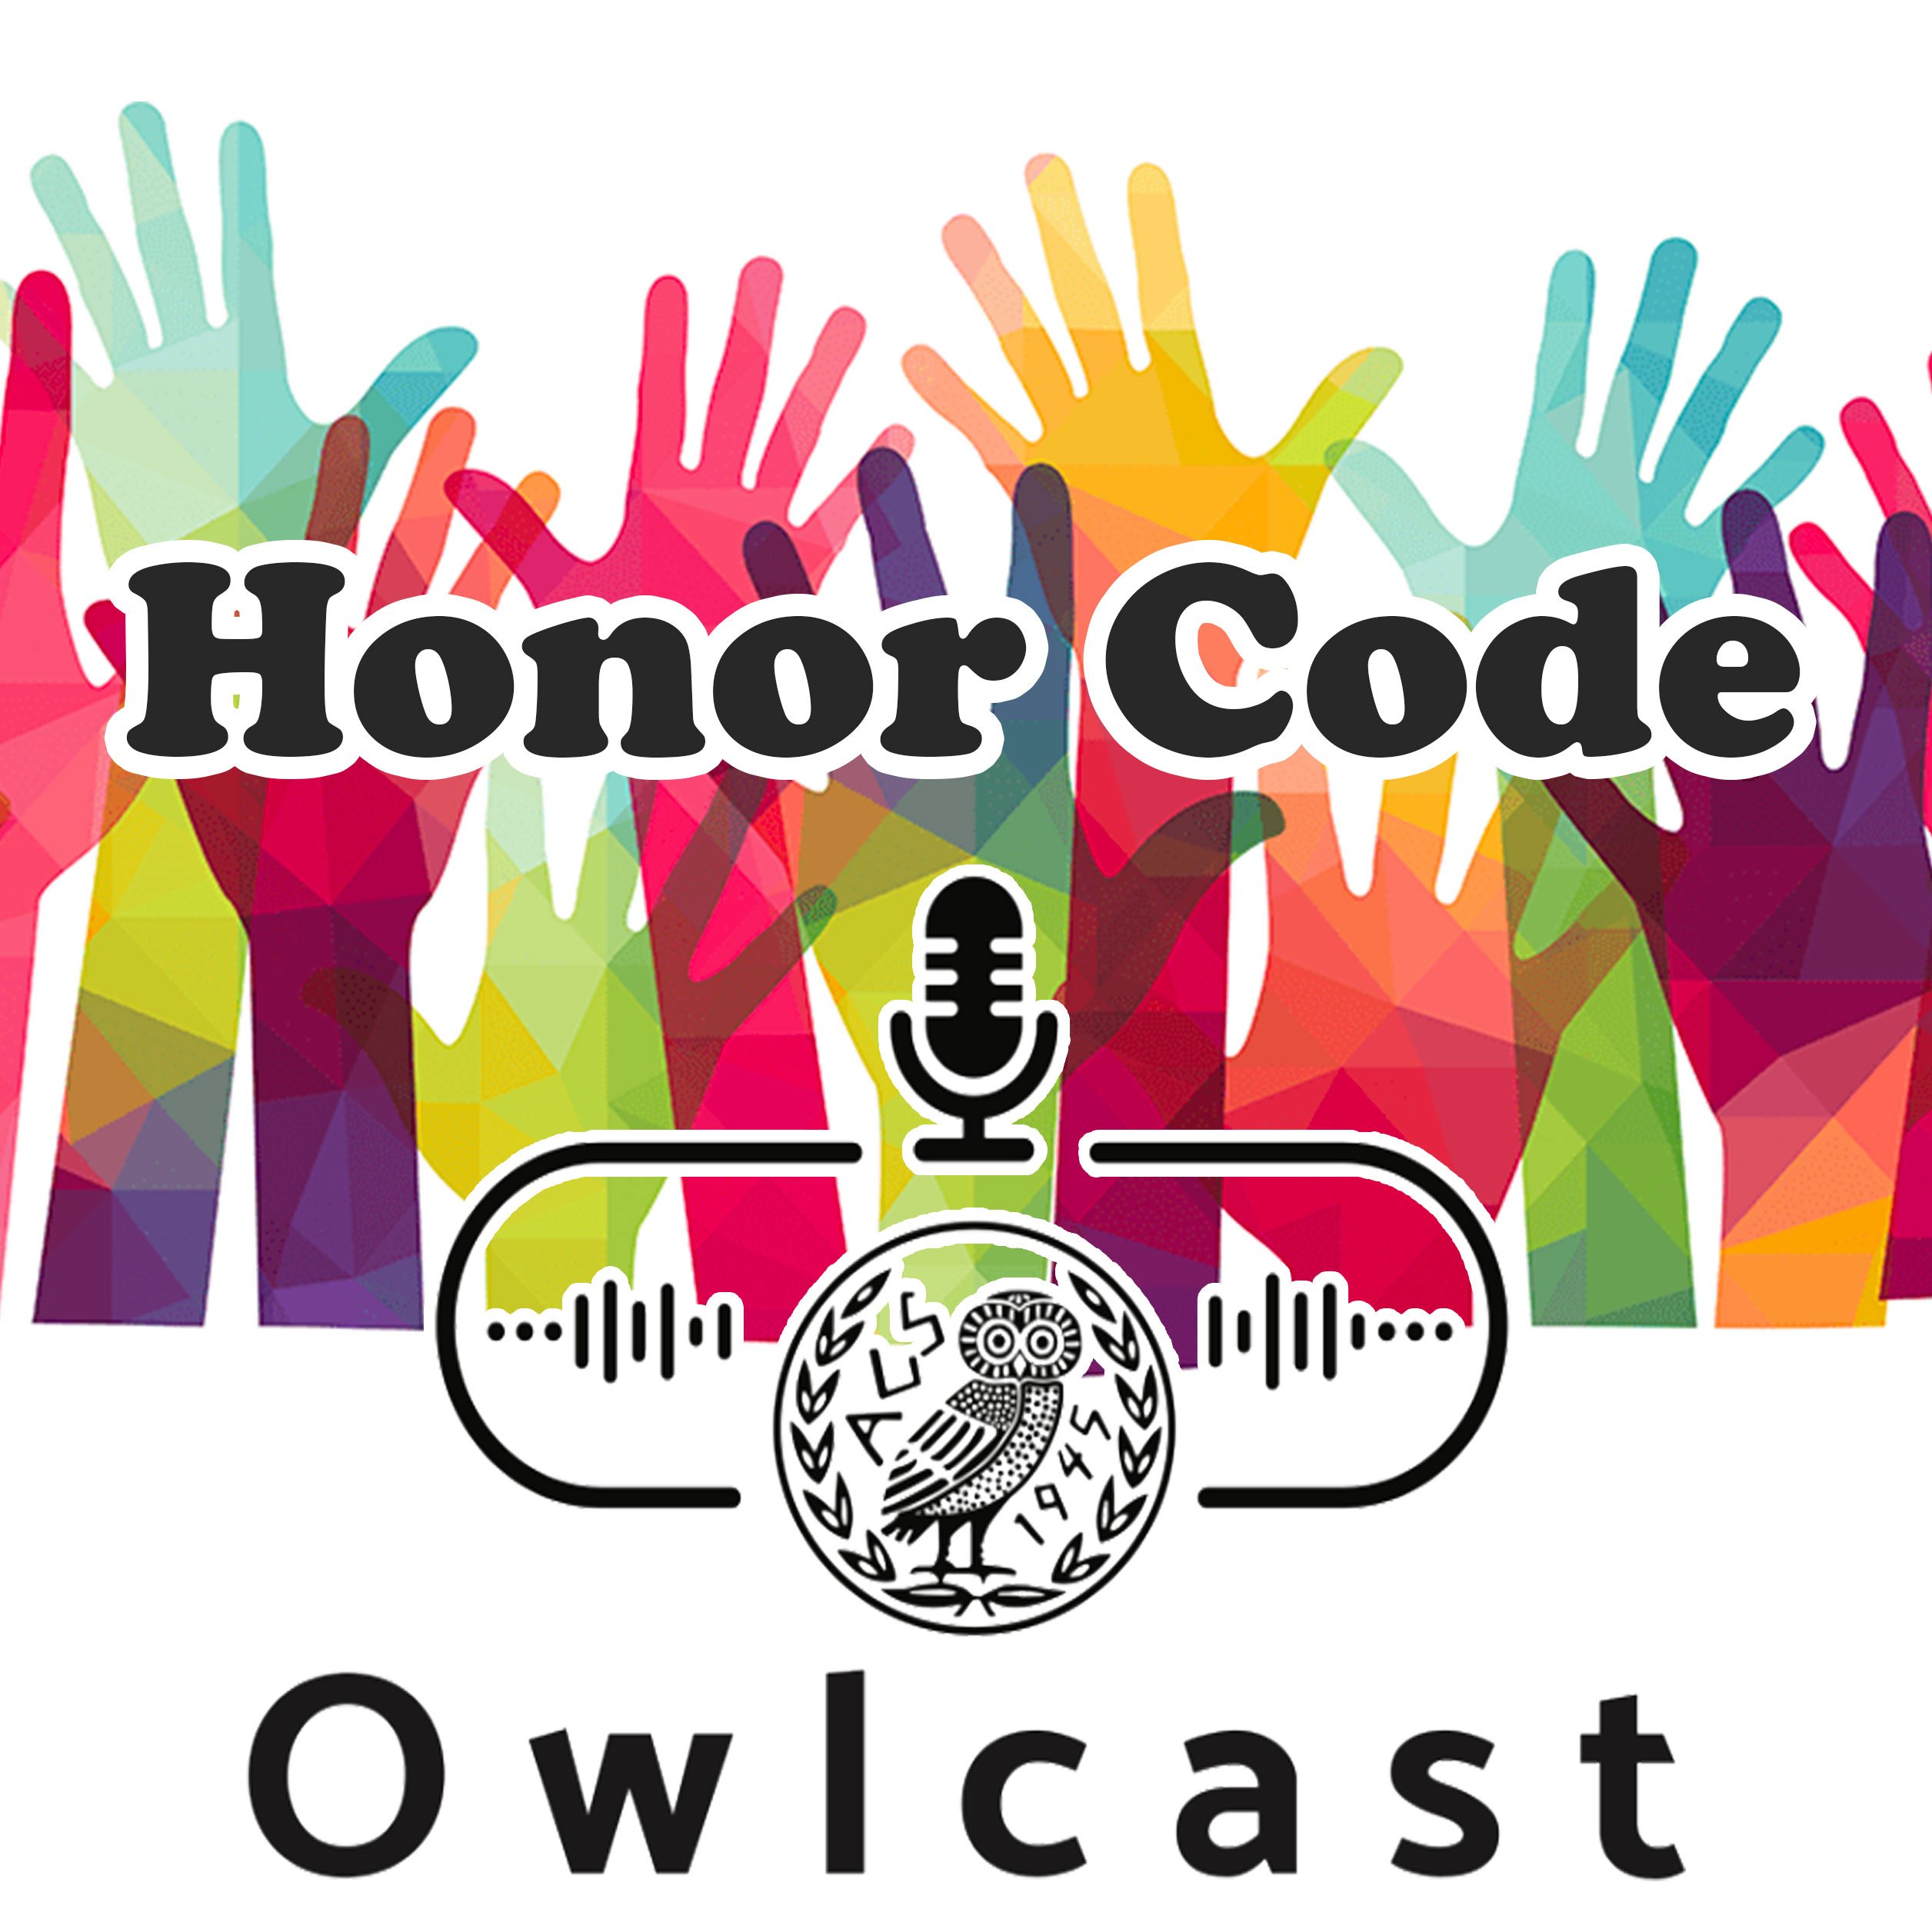 Owlcast 95 - The Fifth Graders of the Elementary Honor Code Club